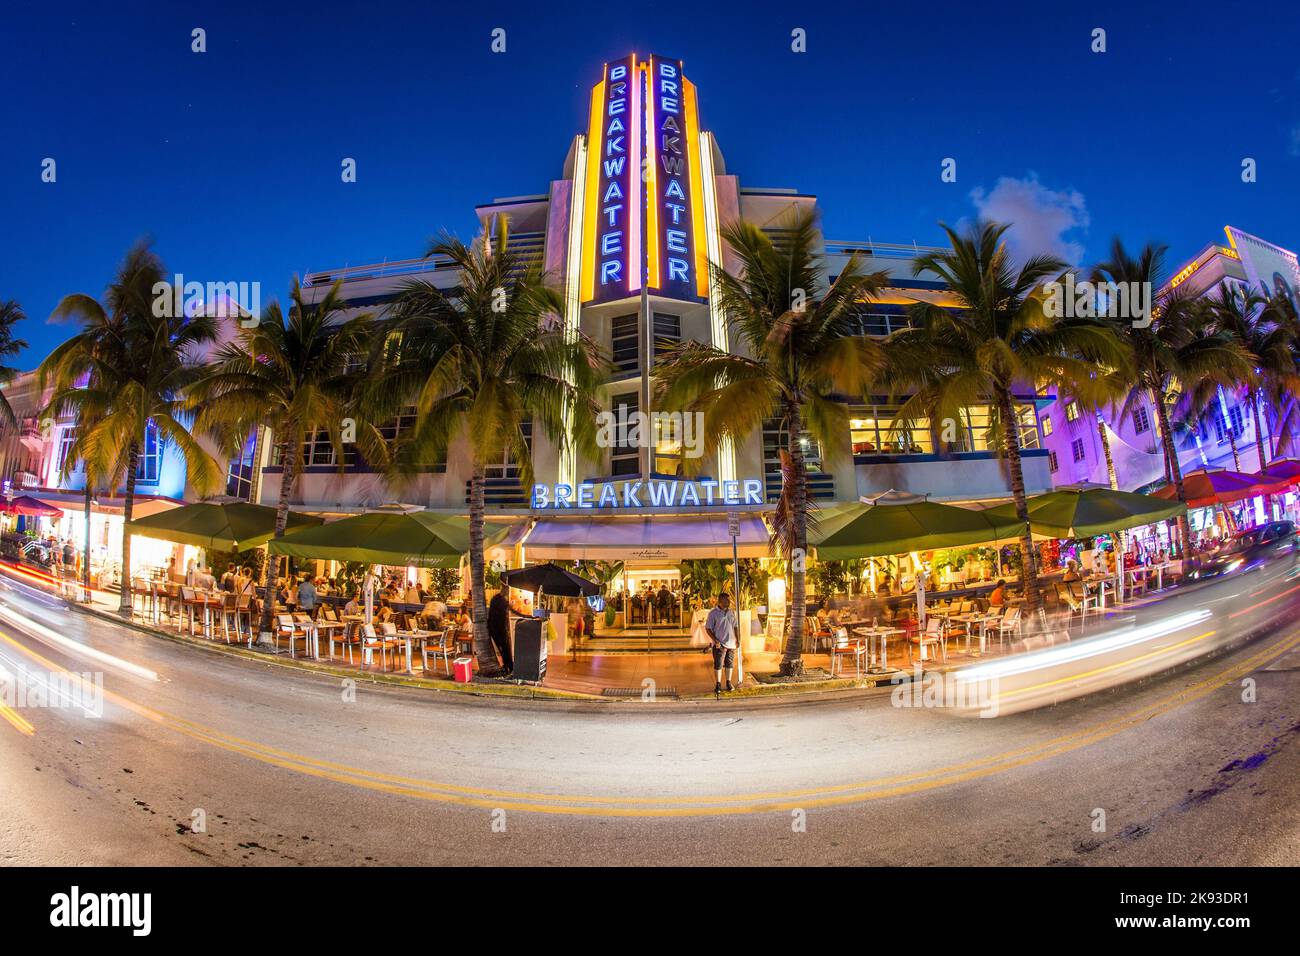 MIAMI, USA - AUG 23, 2014: Breakwater hotel located at Ocean Drive and built in the 1930's is one of the most photographed hotels in South Beach in Mi Stock Photo